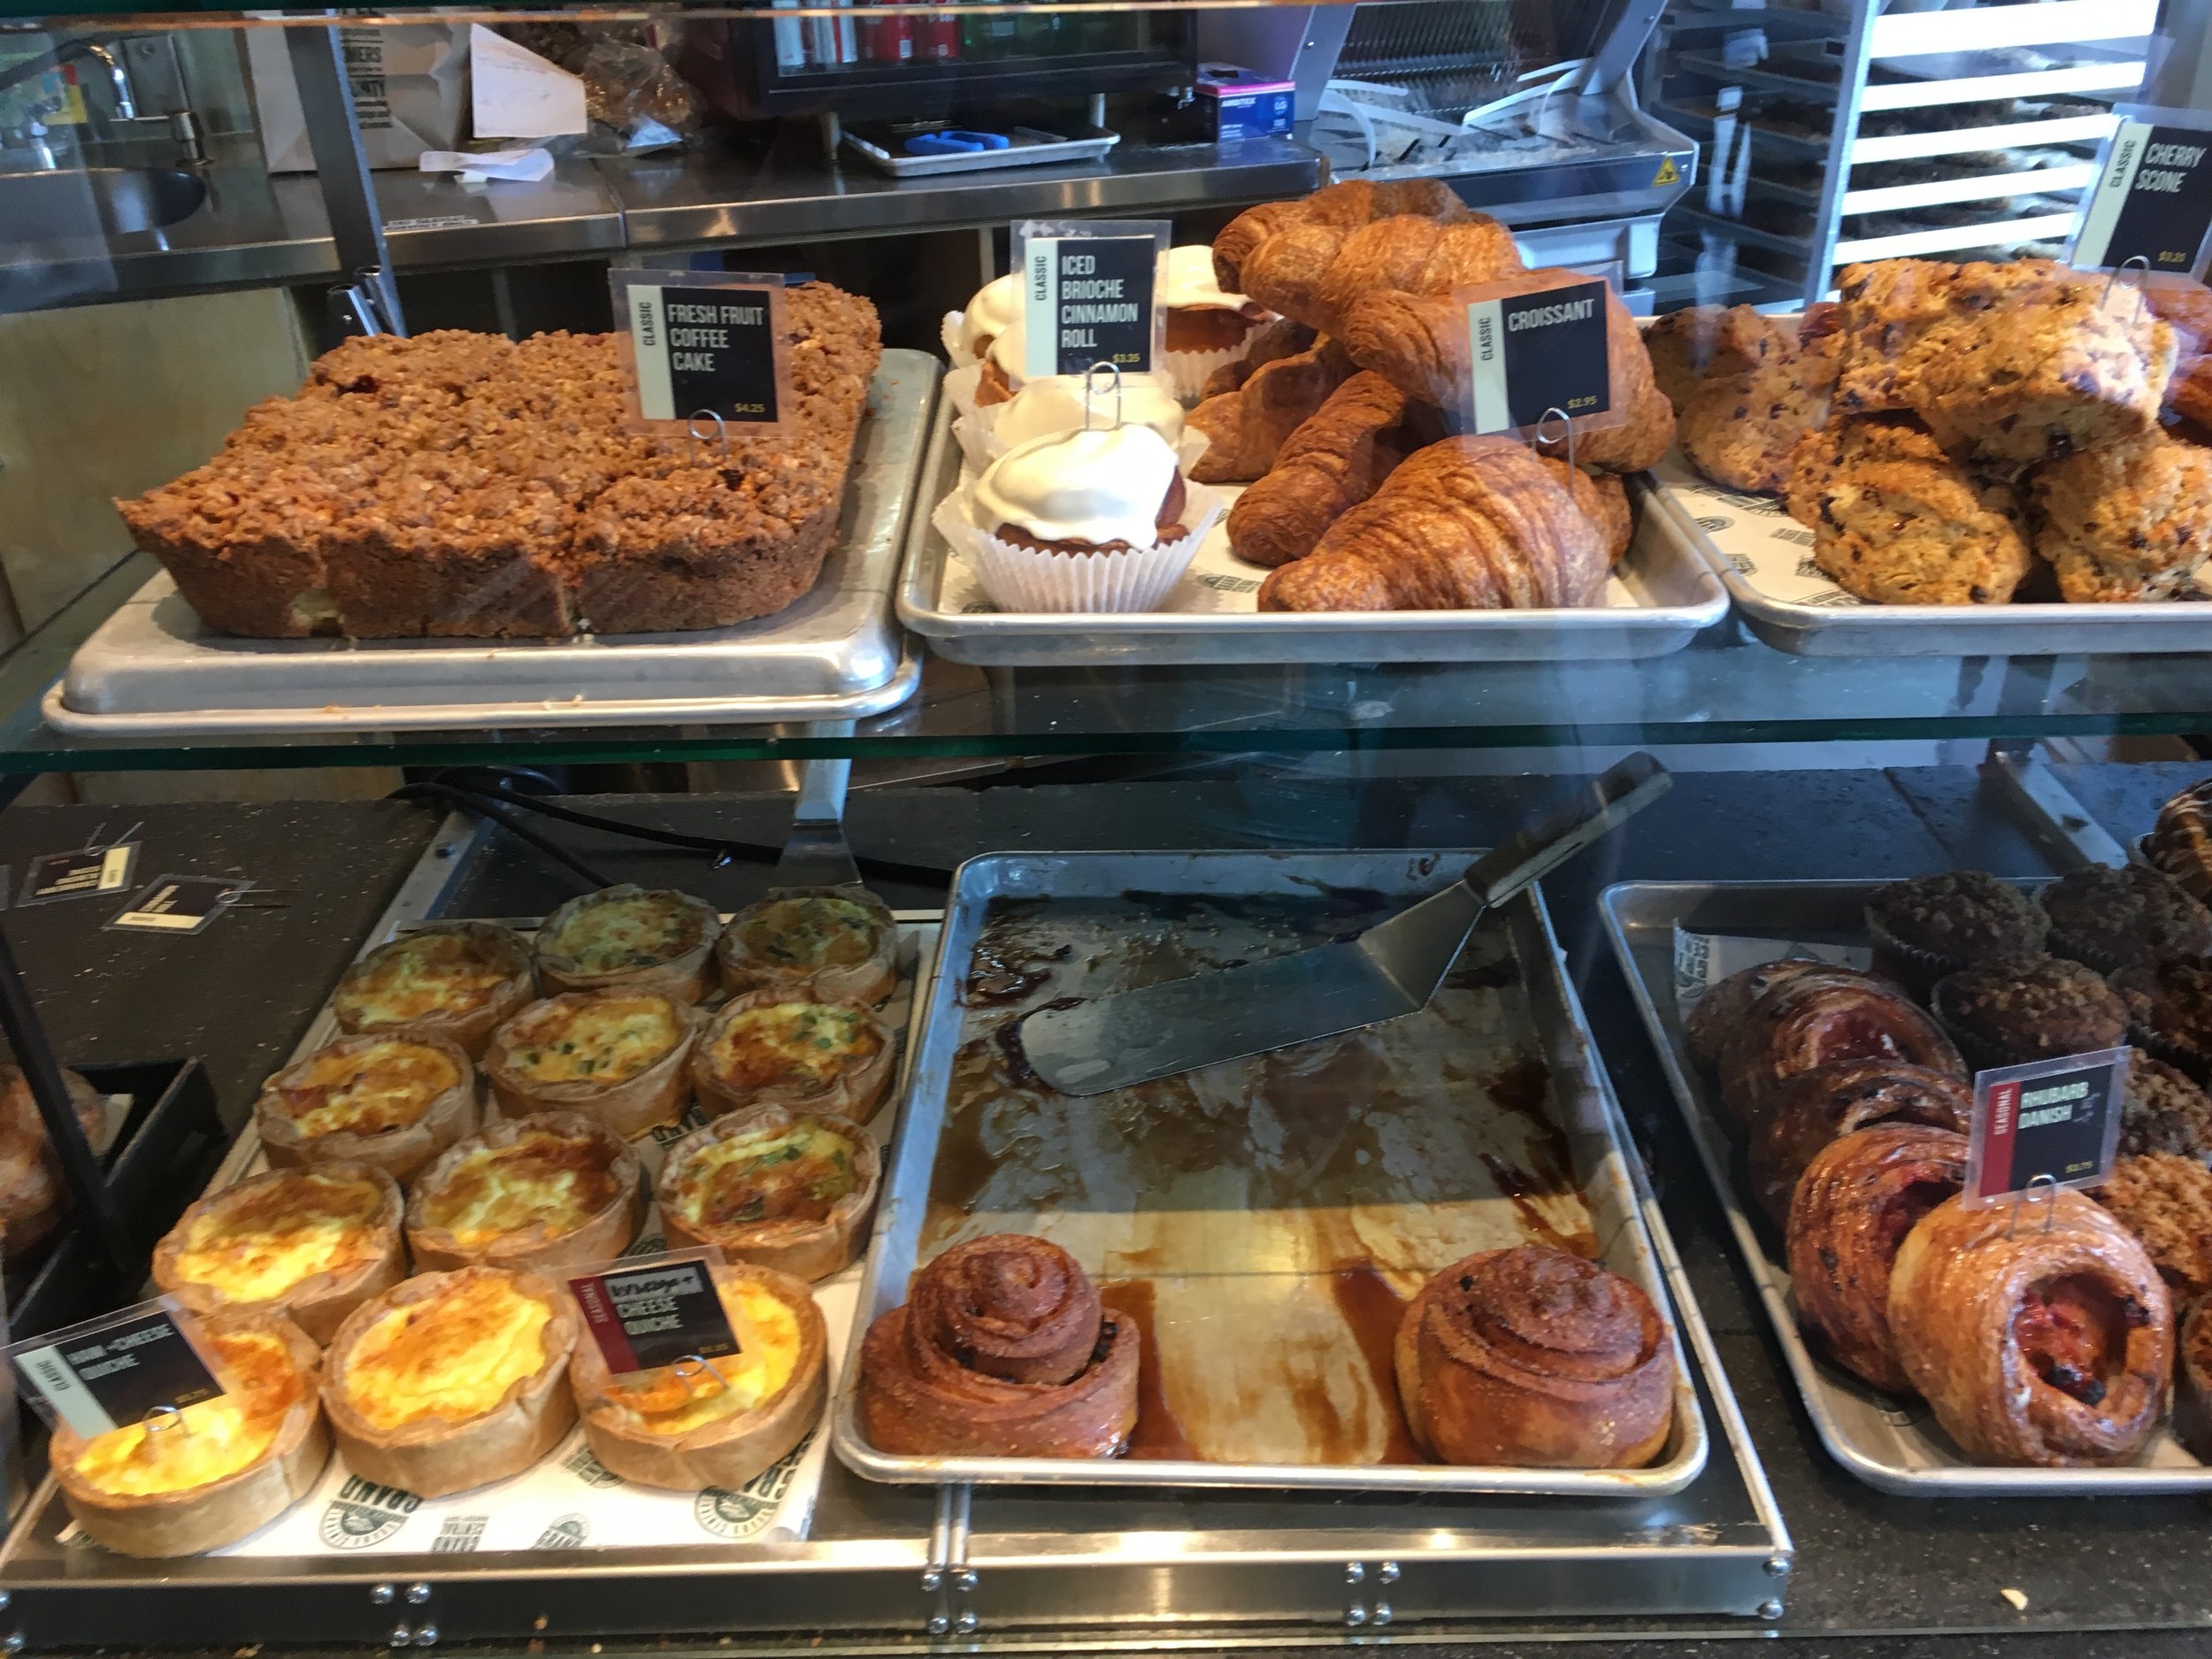 Grand Central Bakery offerings